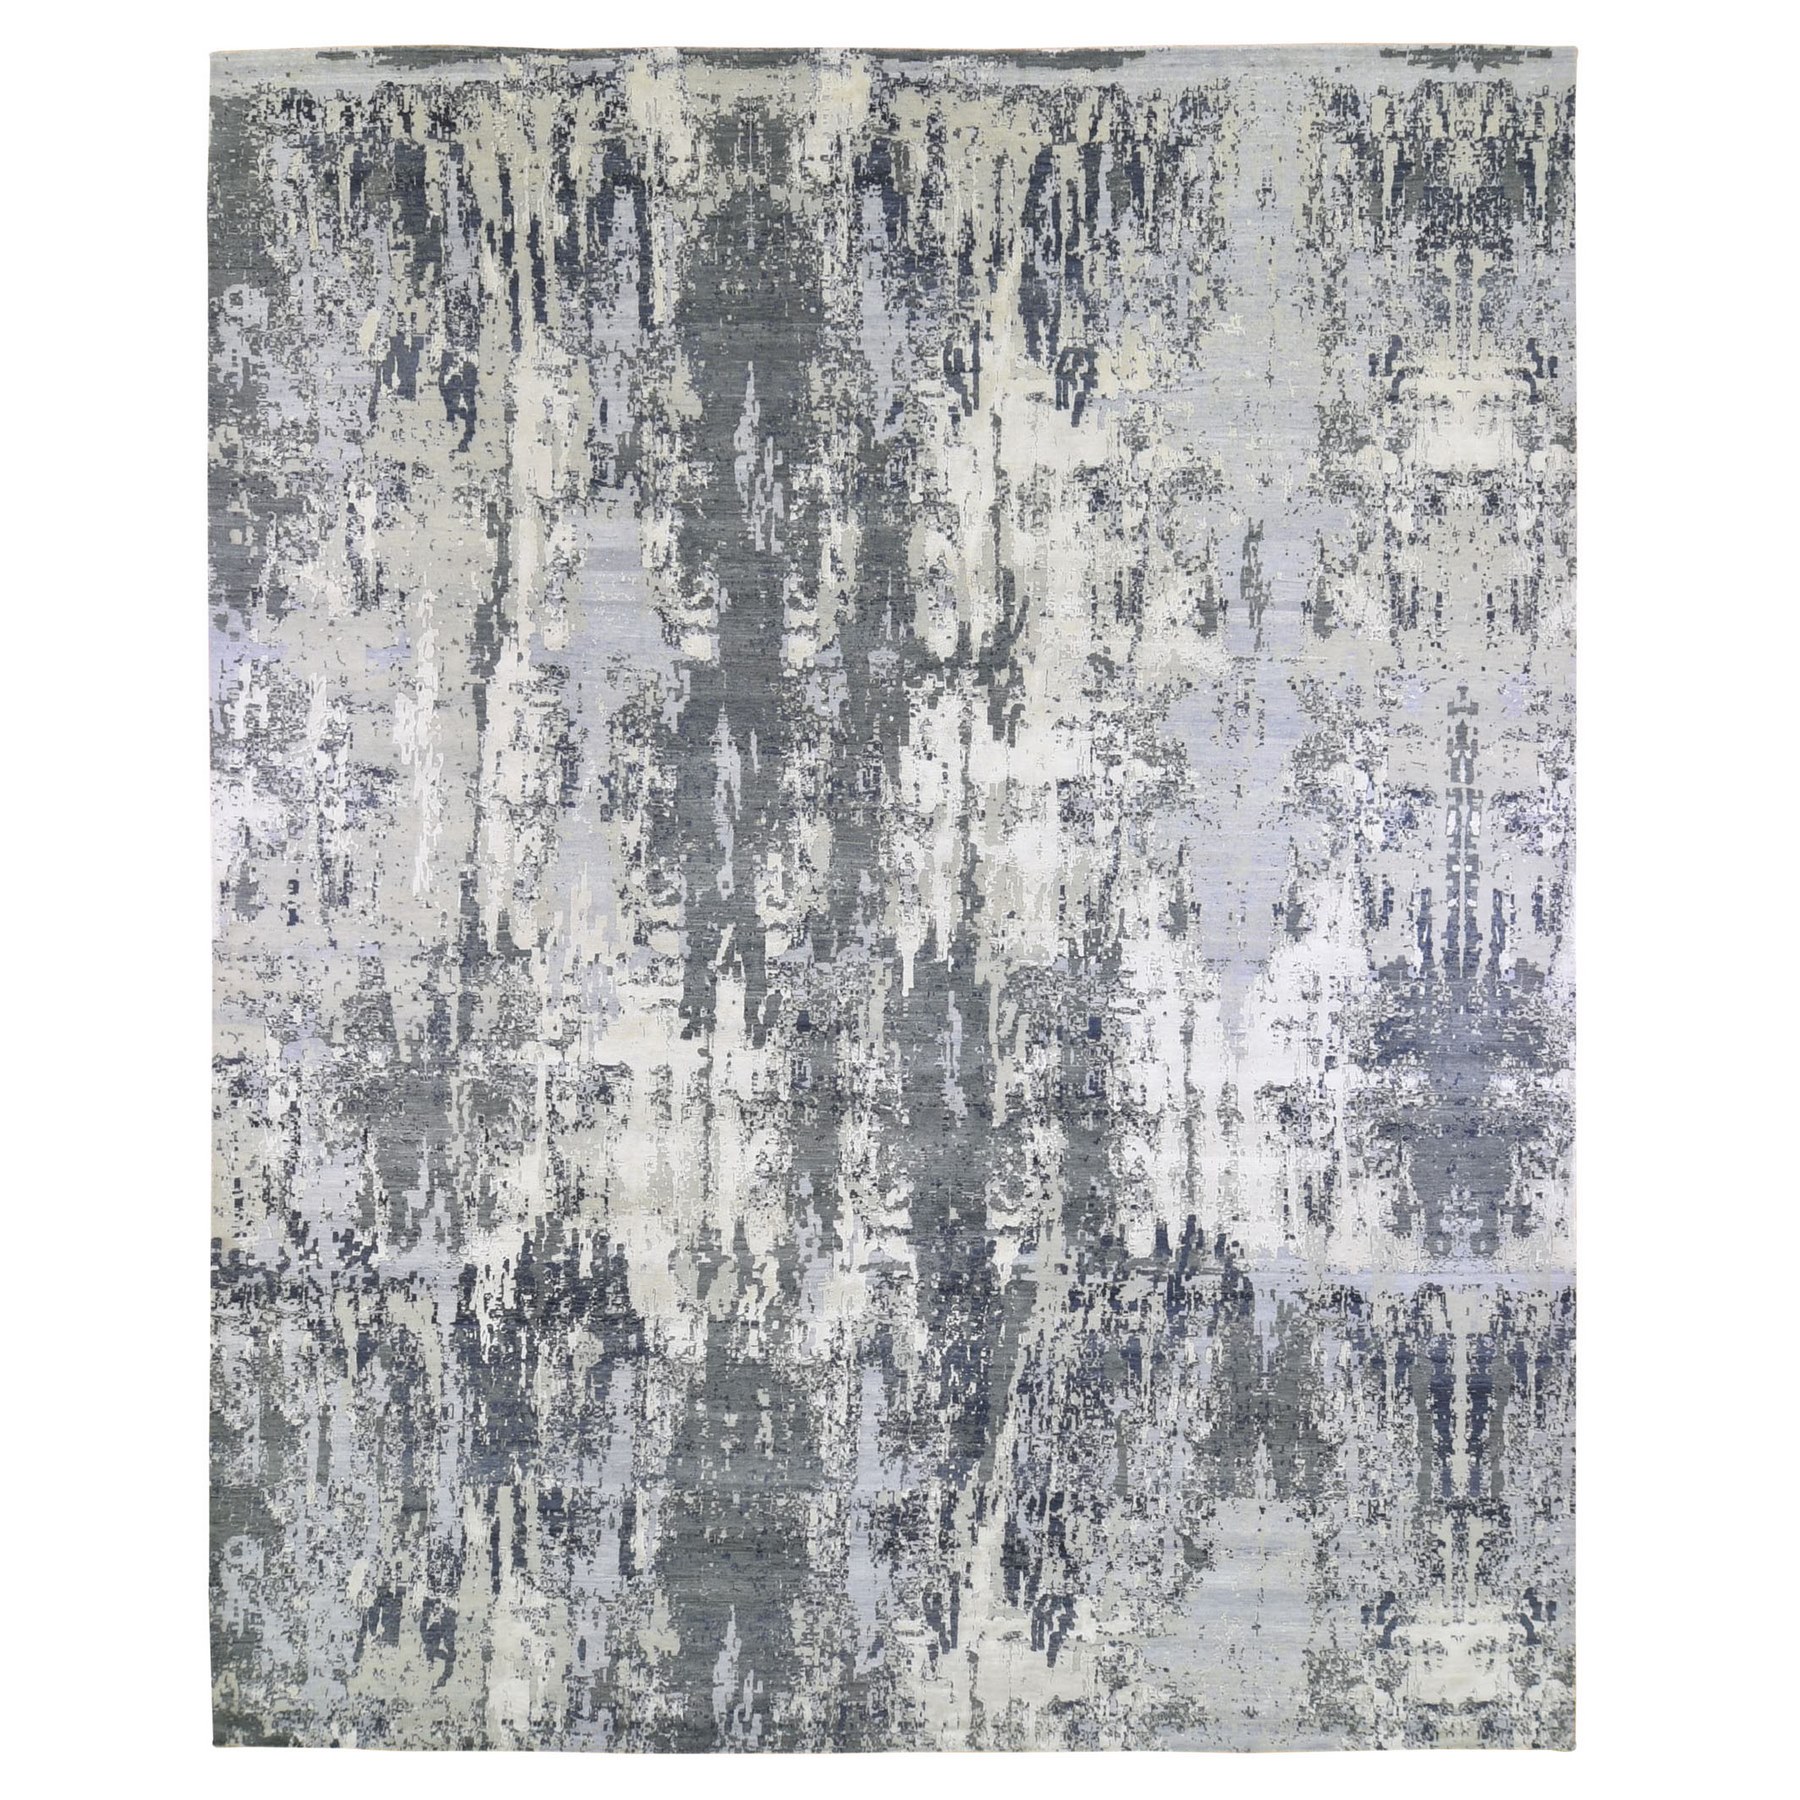 12'1"x15'2" Oversized Abstract Design Wool and Silk Denser Weave Charcoal Gray Persian Knot Hand Woven Oriental Rug 